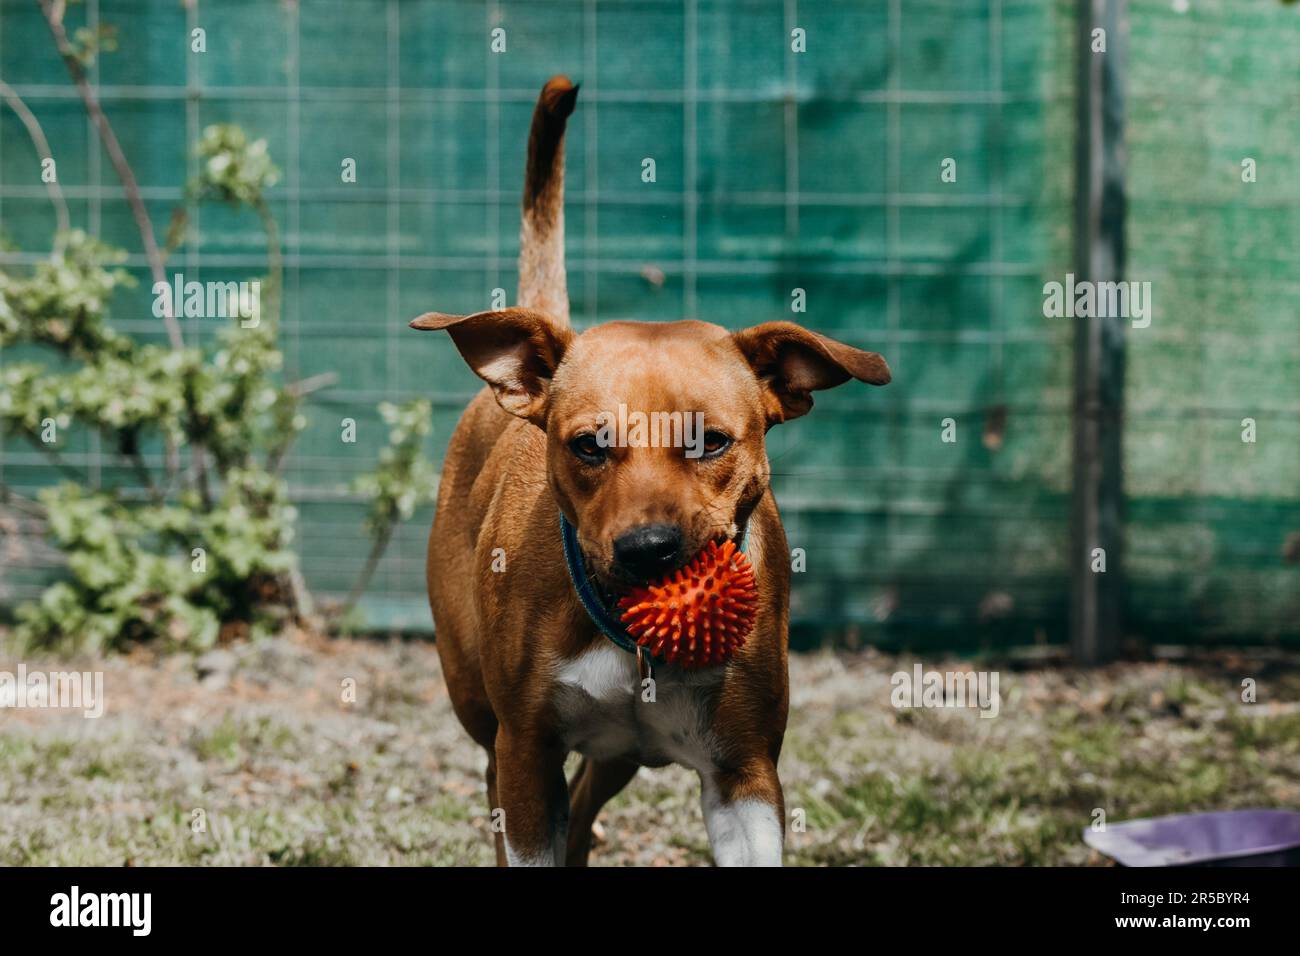 A happy brown dog carrying an orange ball in its mouth while walking in a lush green yard Stock Photo